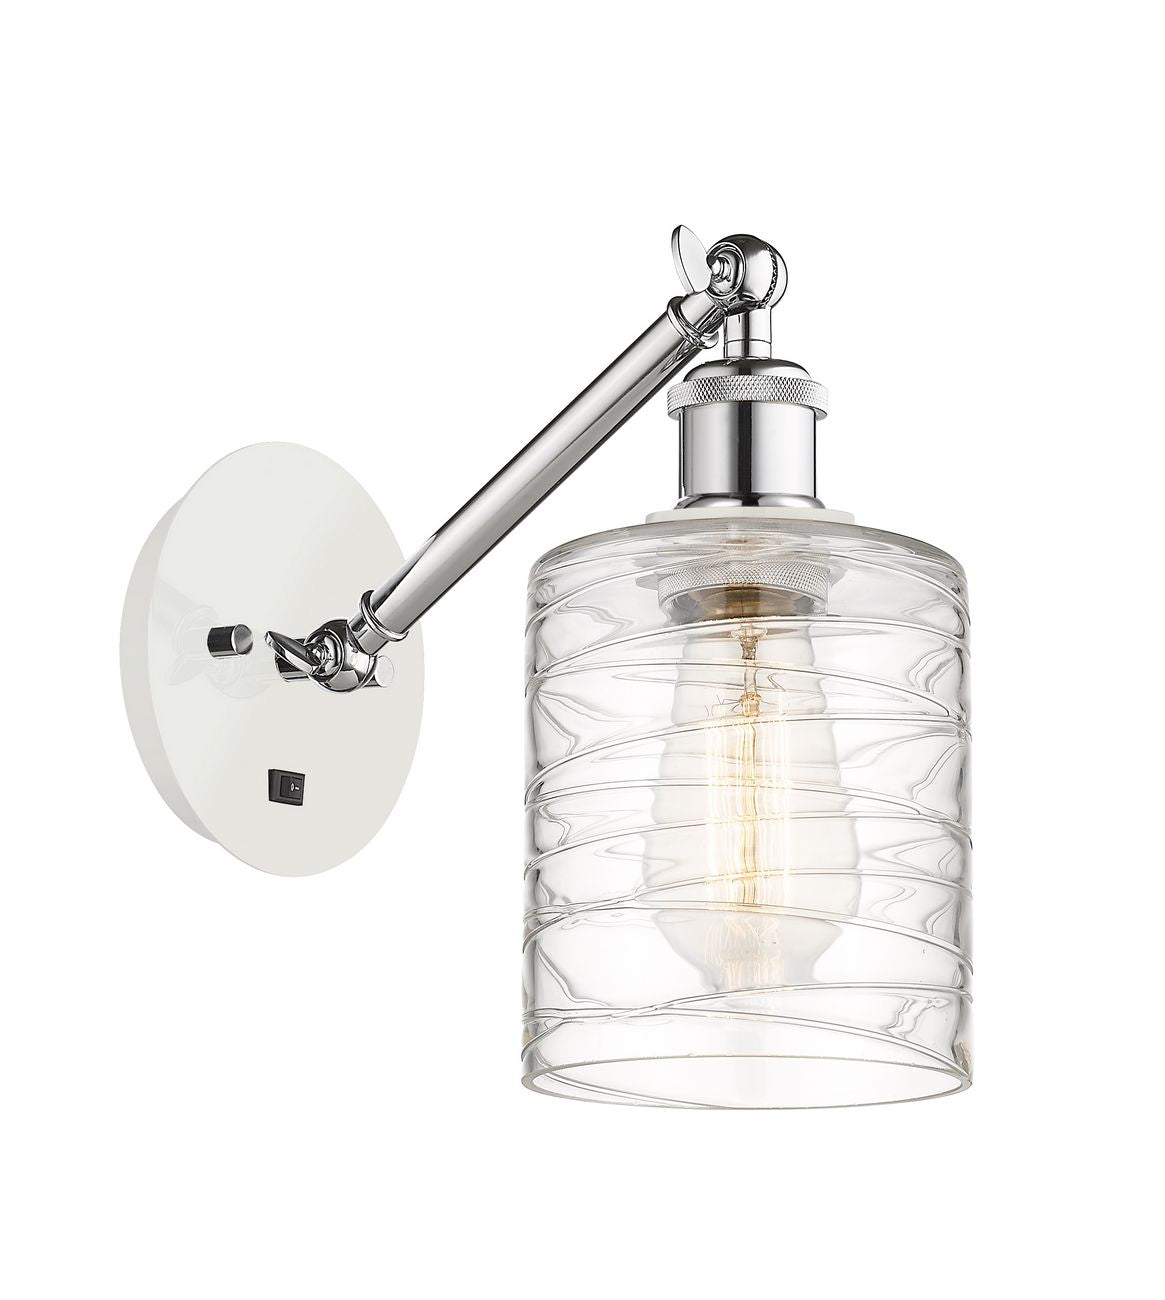 317-1W-WPC-G1113 1-Light 5.3" White and Polished Chrome Sconce - Deco Swirl Cobbleskill Glass - LED Bulb - Dimmensions: 5.3 x 12.5 x 12.75 - Glass Up or Down: Yes